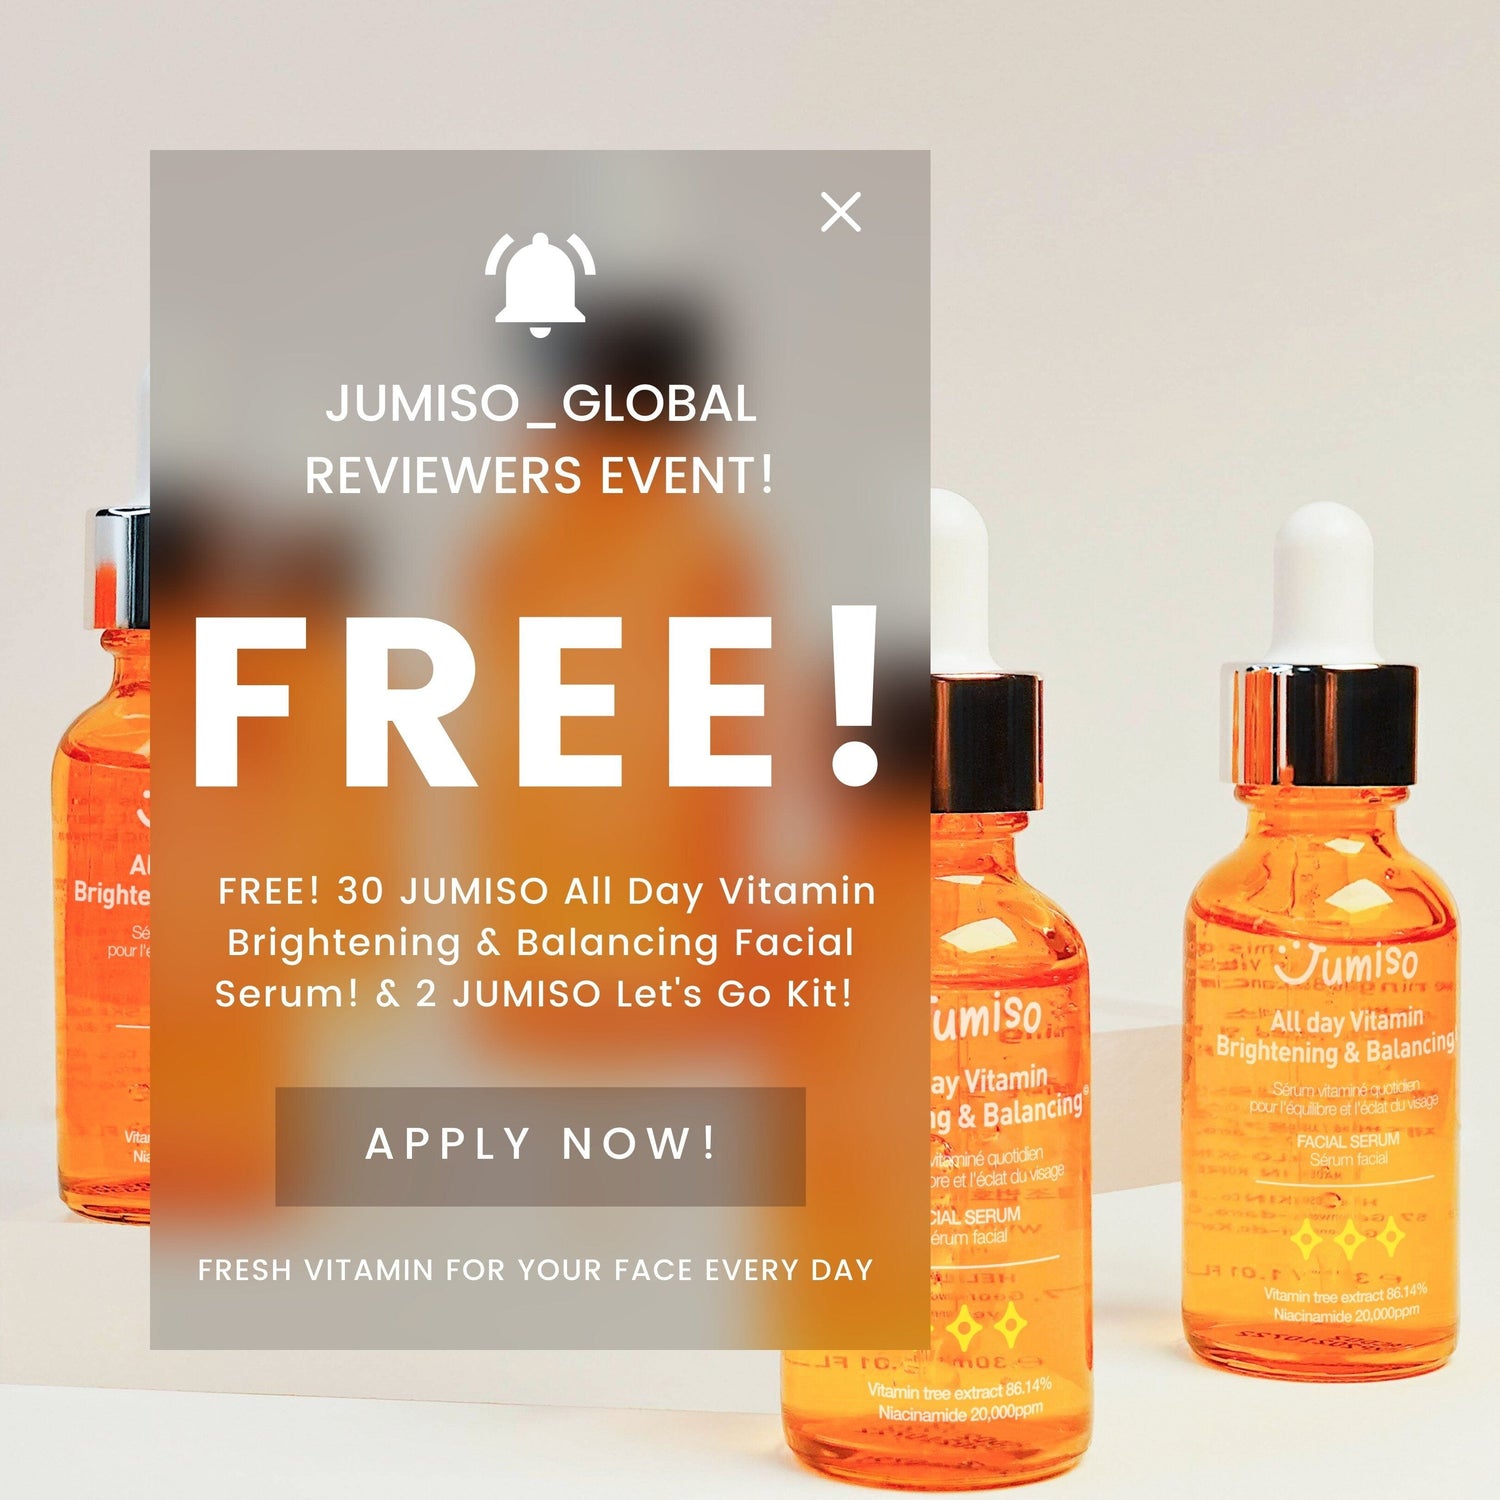 Jumiso Reviewers Event!